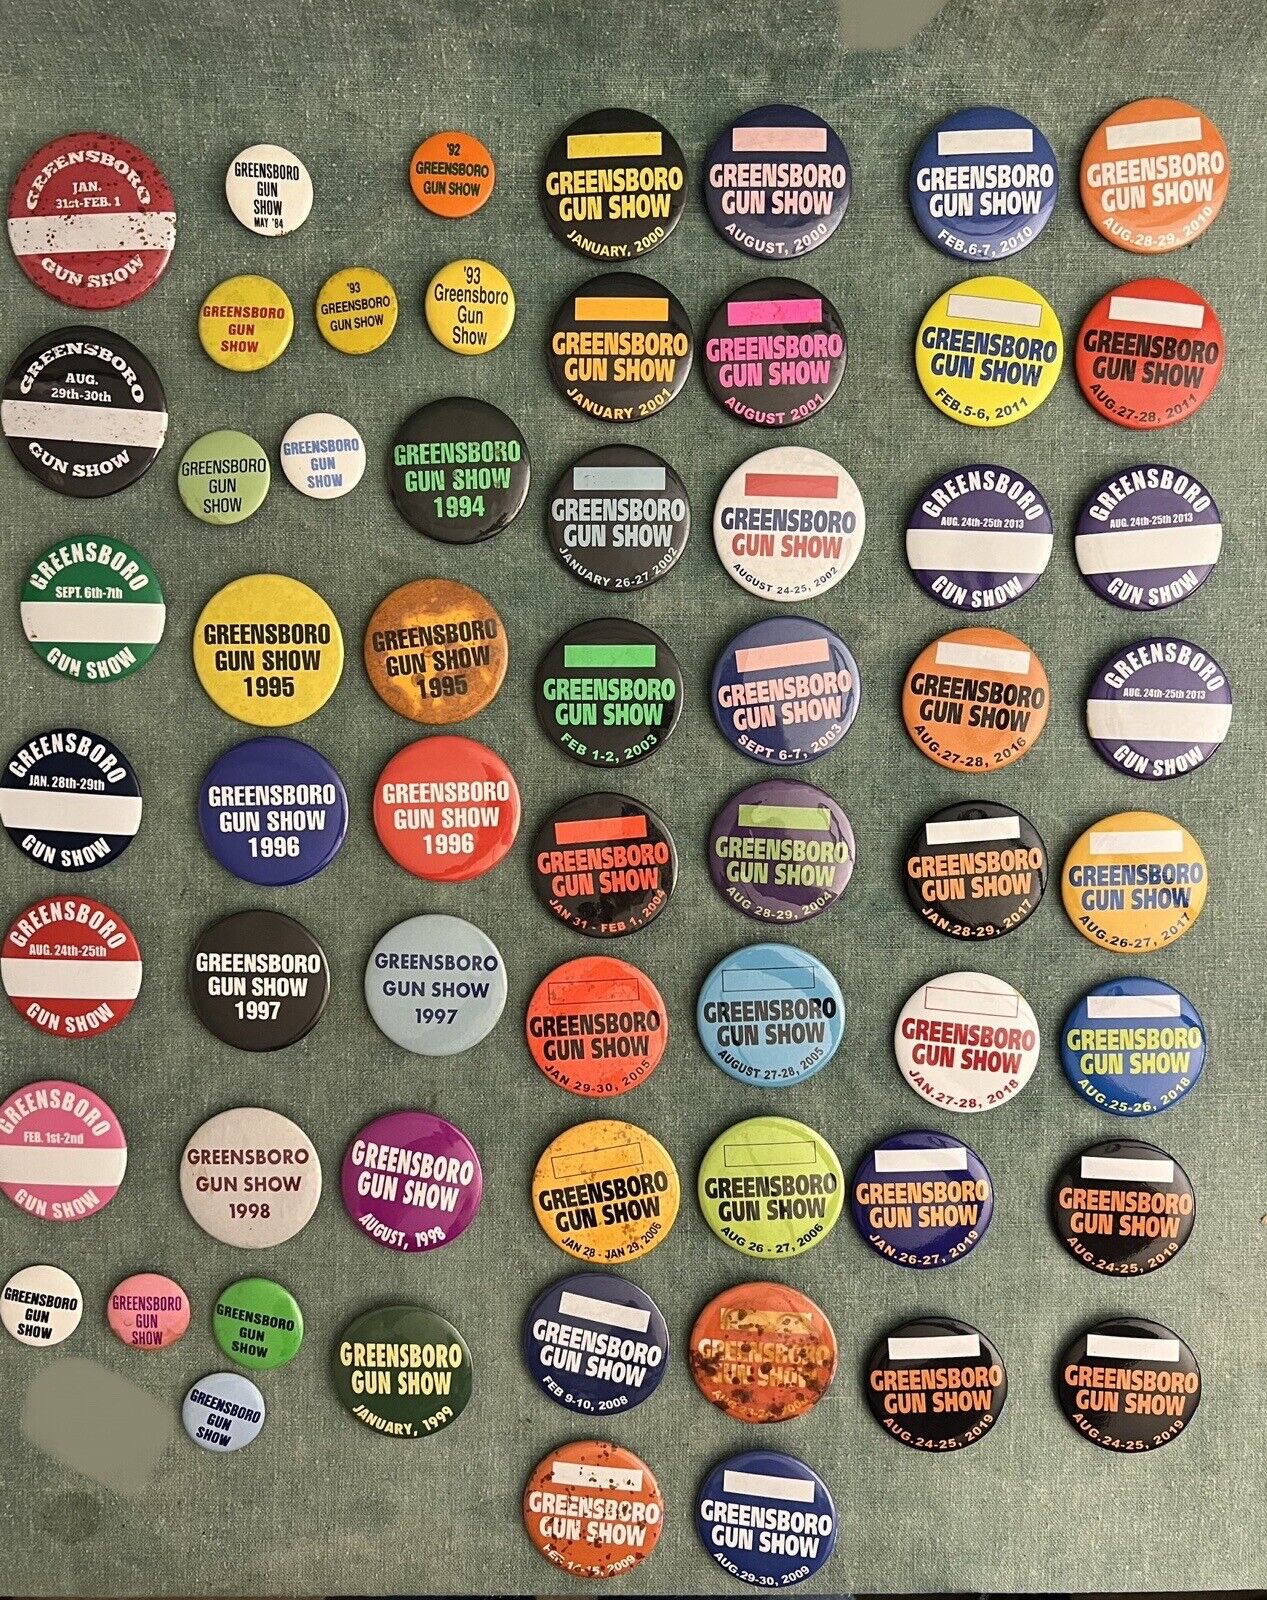 Lot of 60 Vintage & Recent Greensboro Gun Show Pin-back Buttons - From 1984-2019